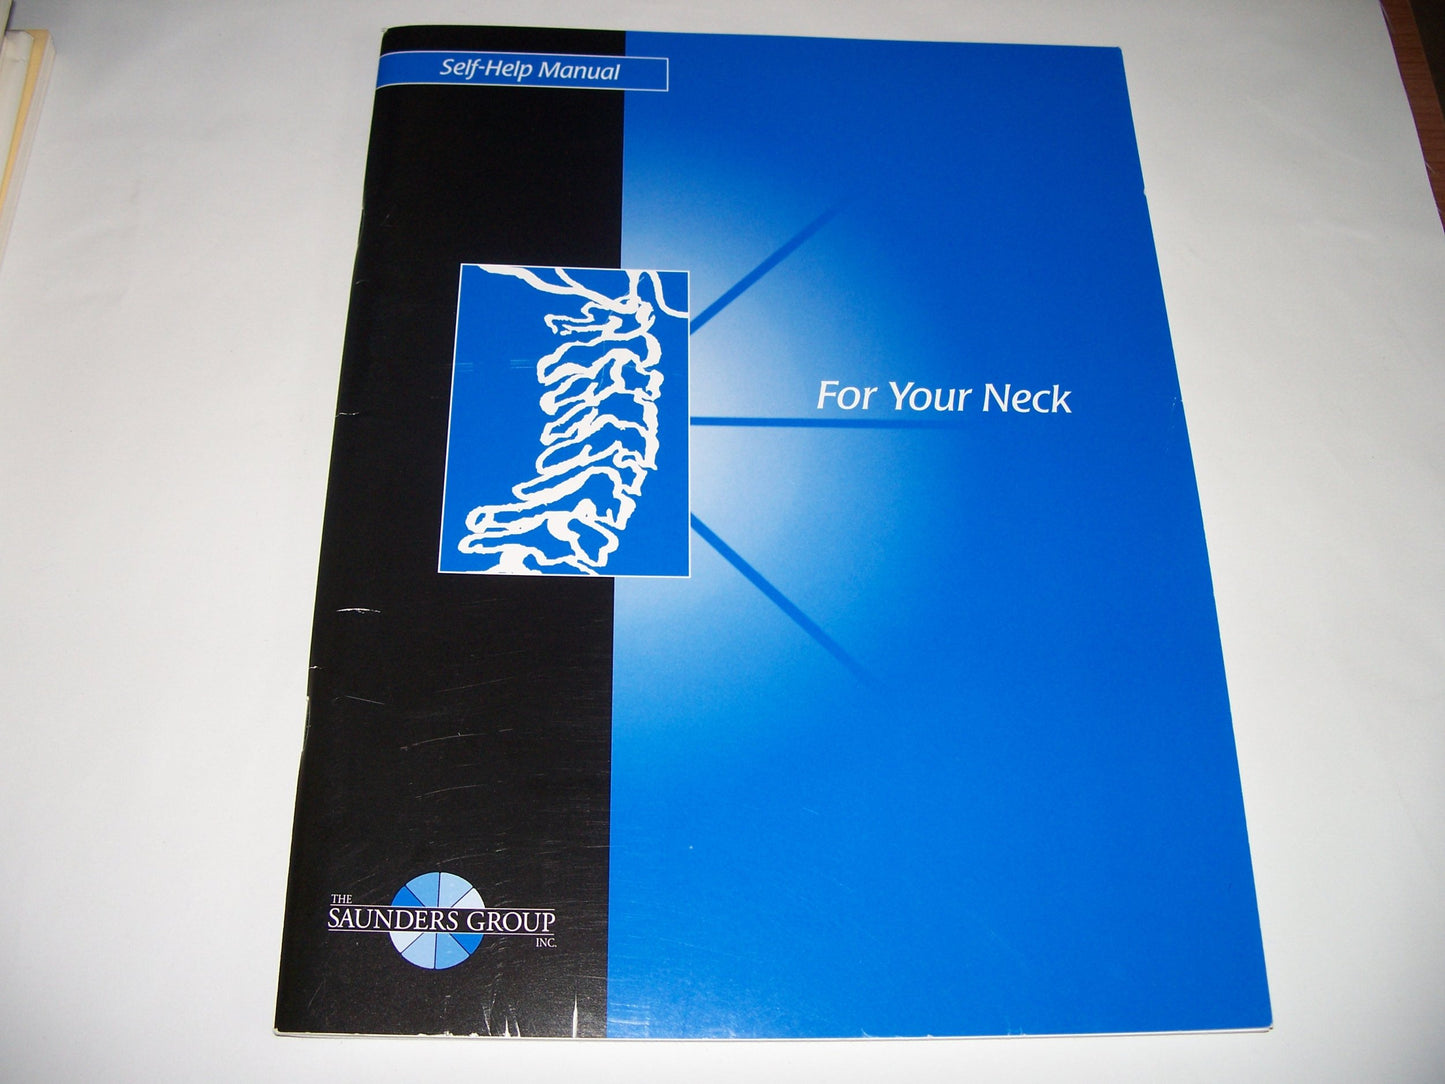 For Your Neck Manual